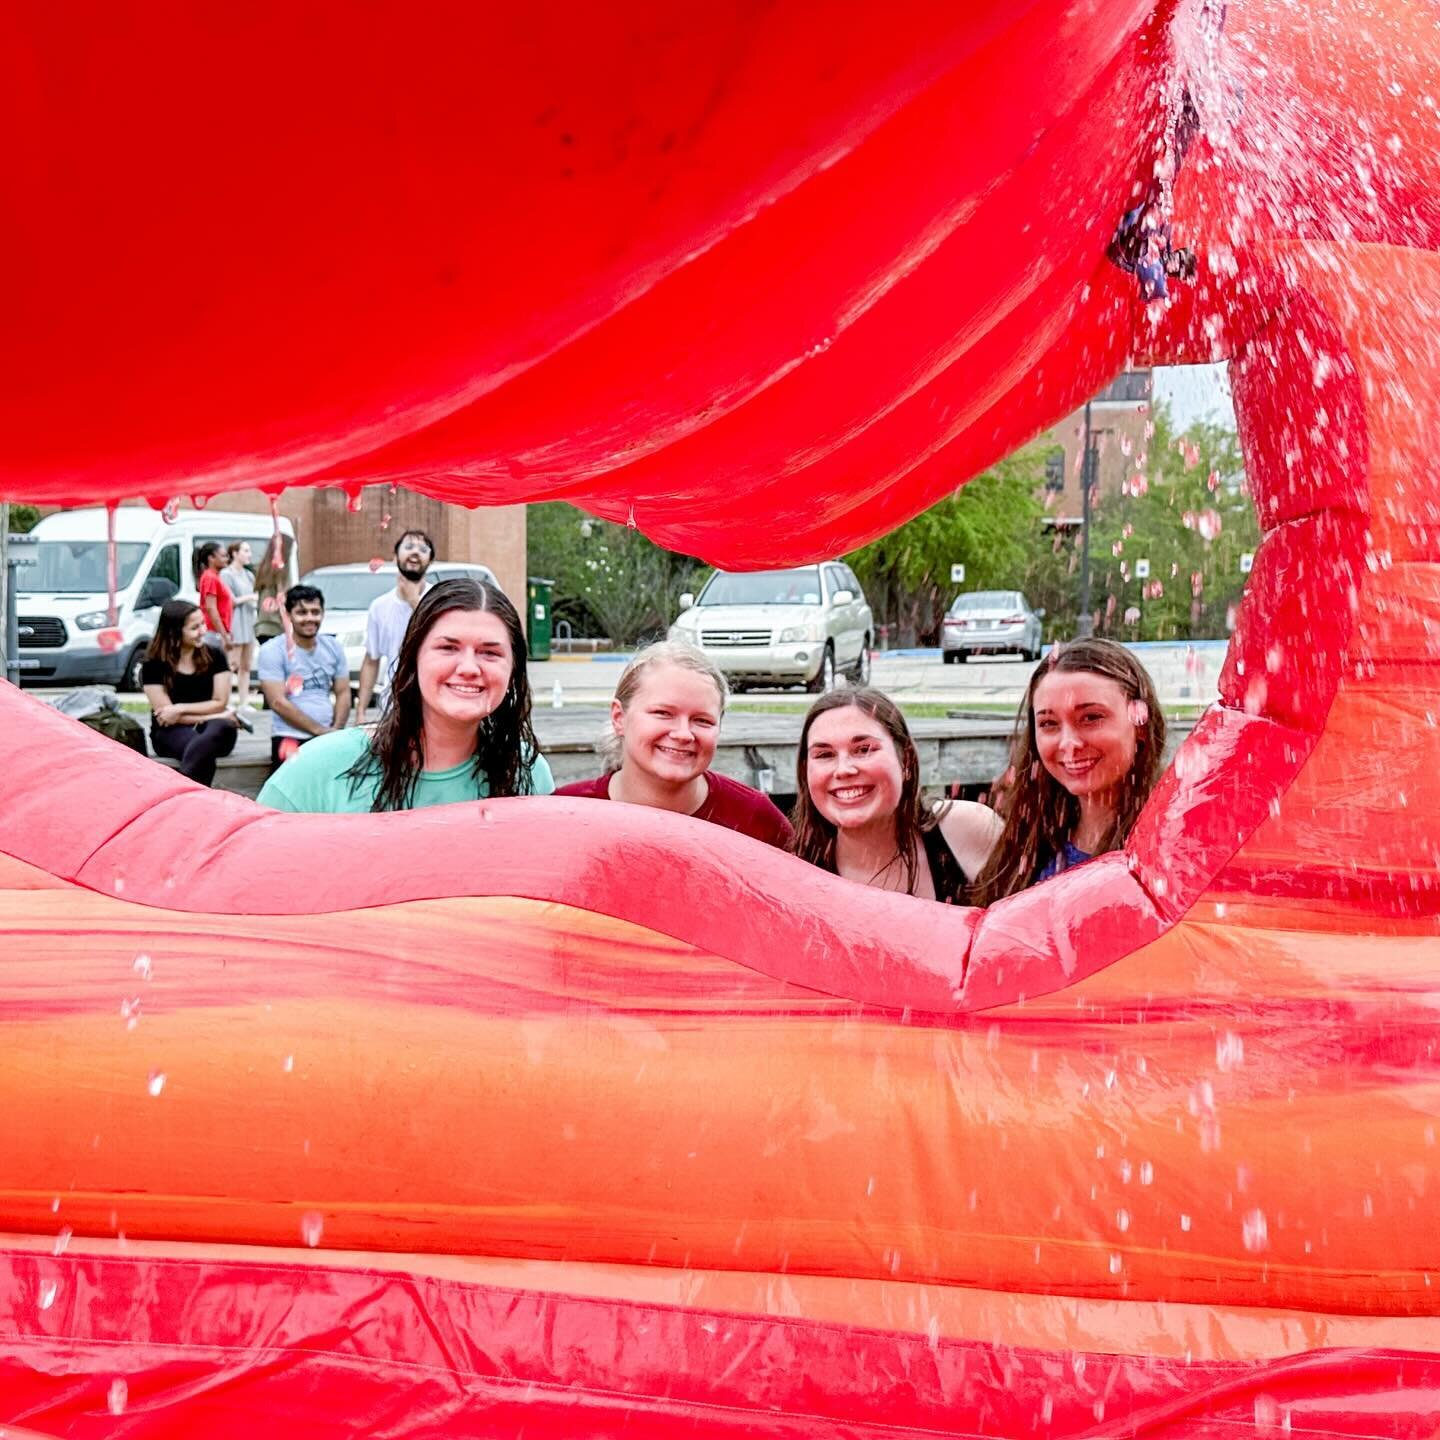 Is anybody else sore from hurling yourself down a 30ft water slide last night??? 🌊🛝 From the looks of these faces, it was worth it!

Thanks to all who came out last night for a little bit of fun during a stressful part of the semester!